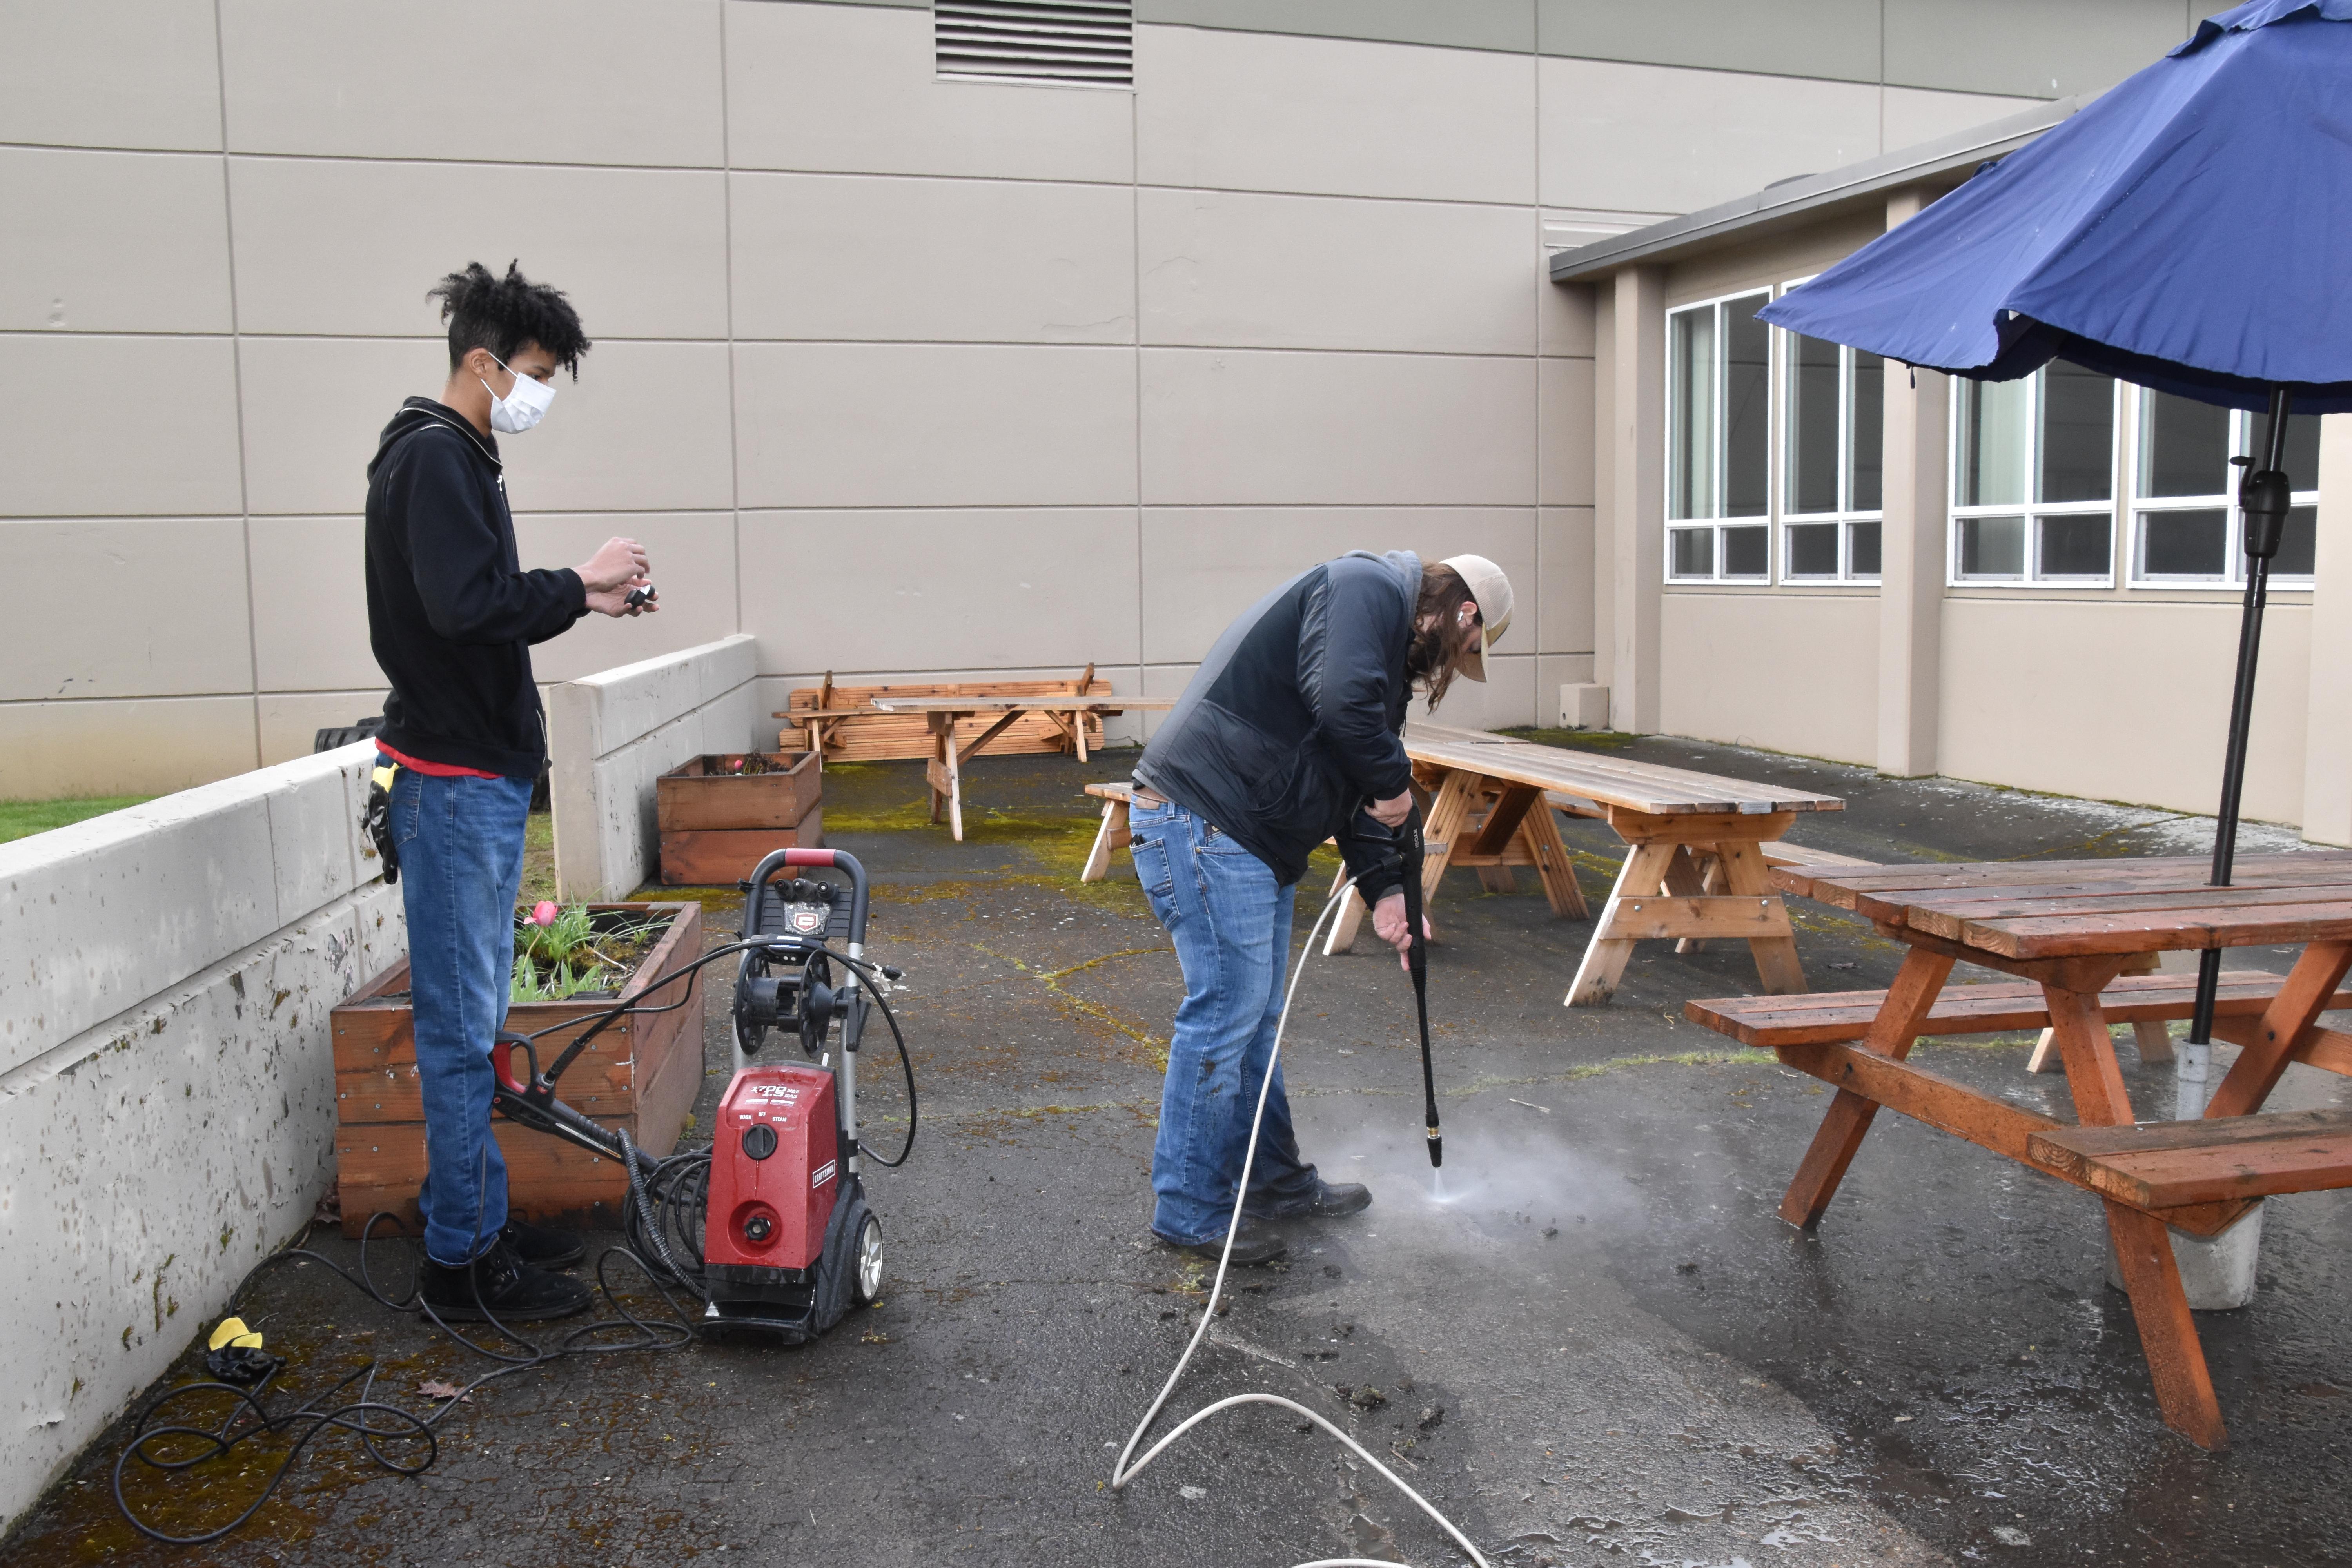 Power washing the student patio